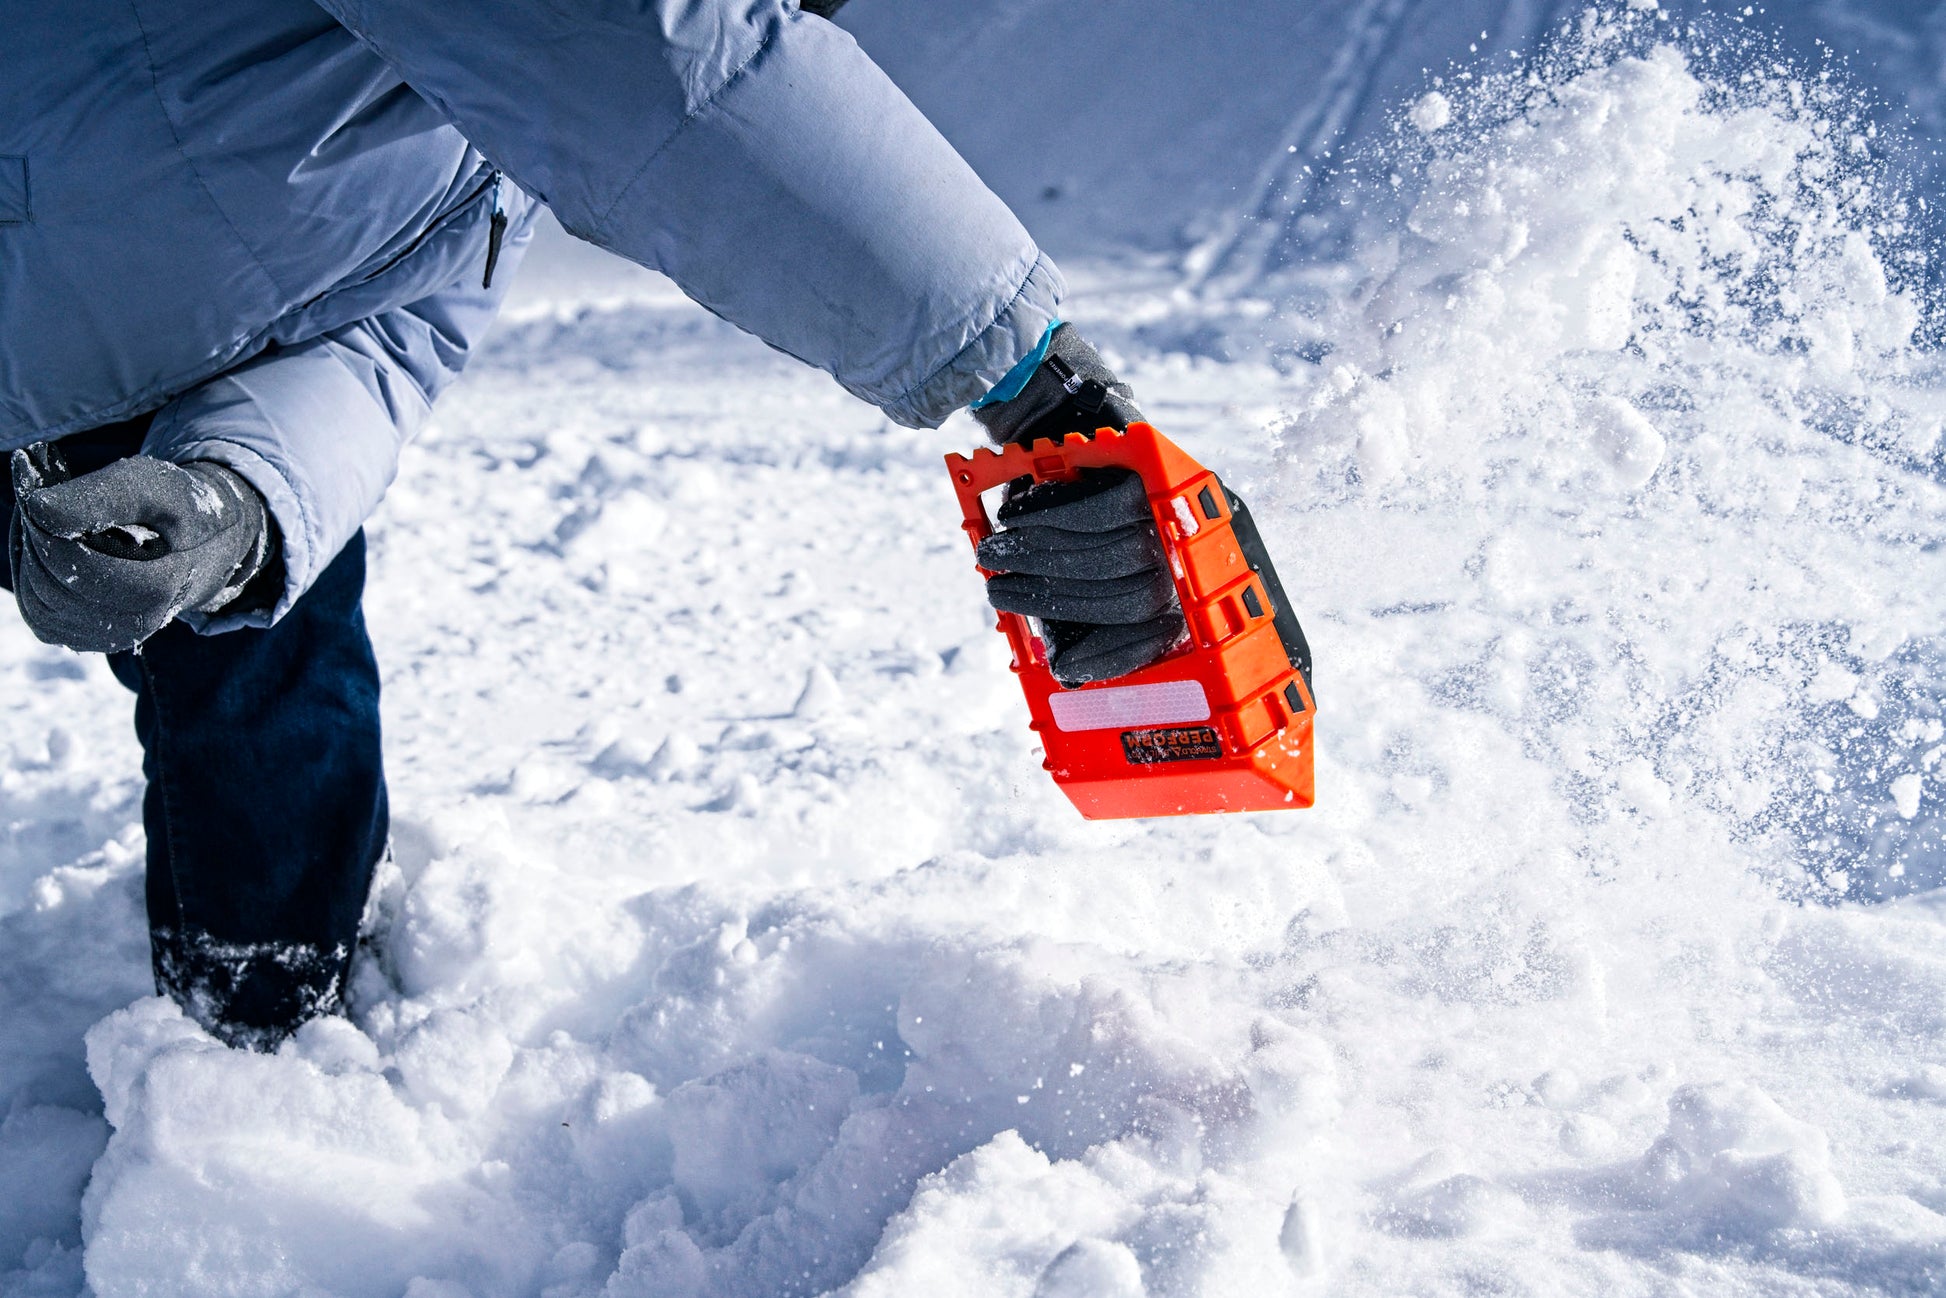 Stayhold Compact Safety Shovel - Mini clearing snow